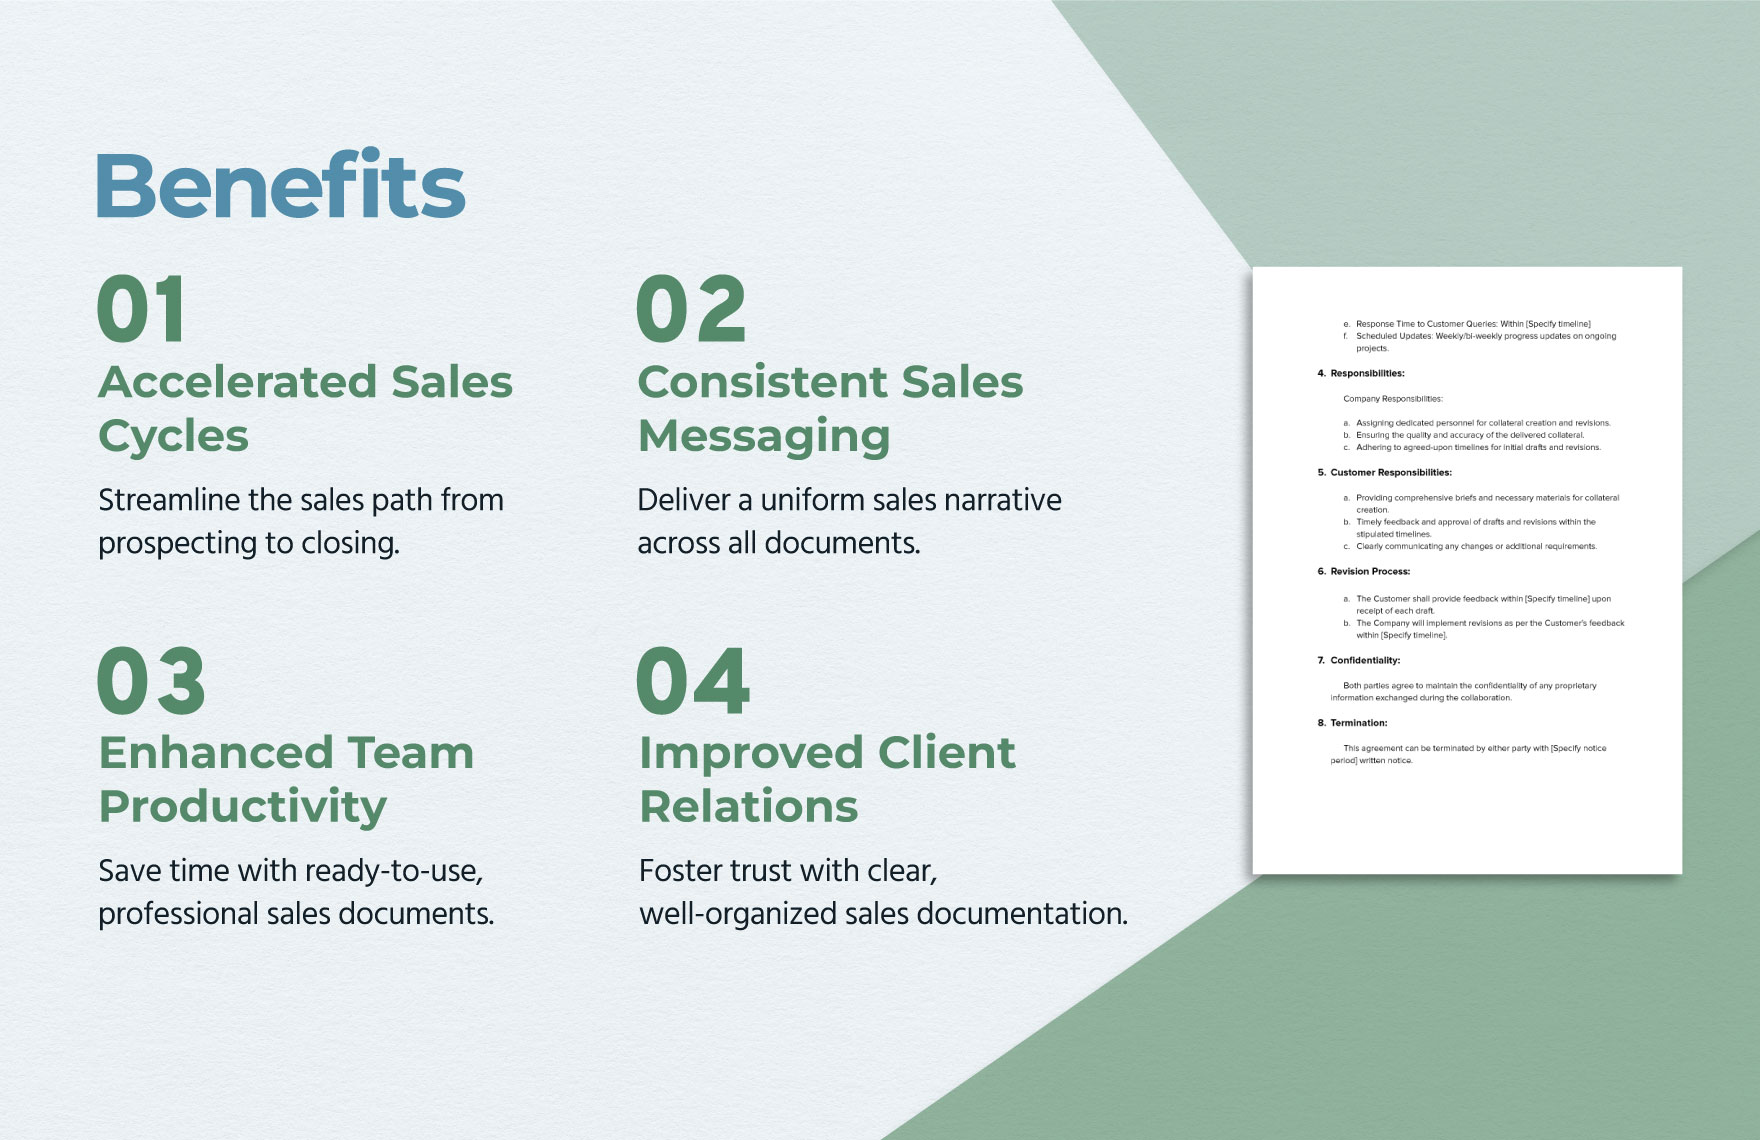 Sales Collateral Creation SLA Template